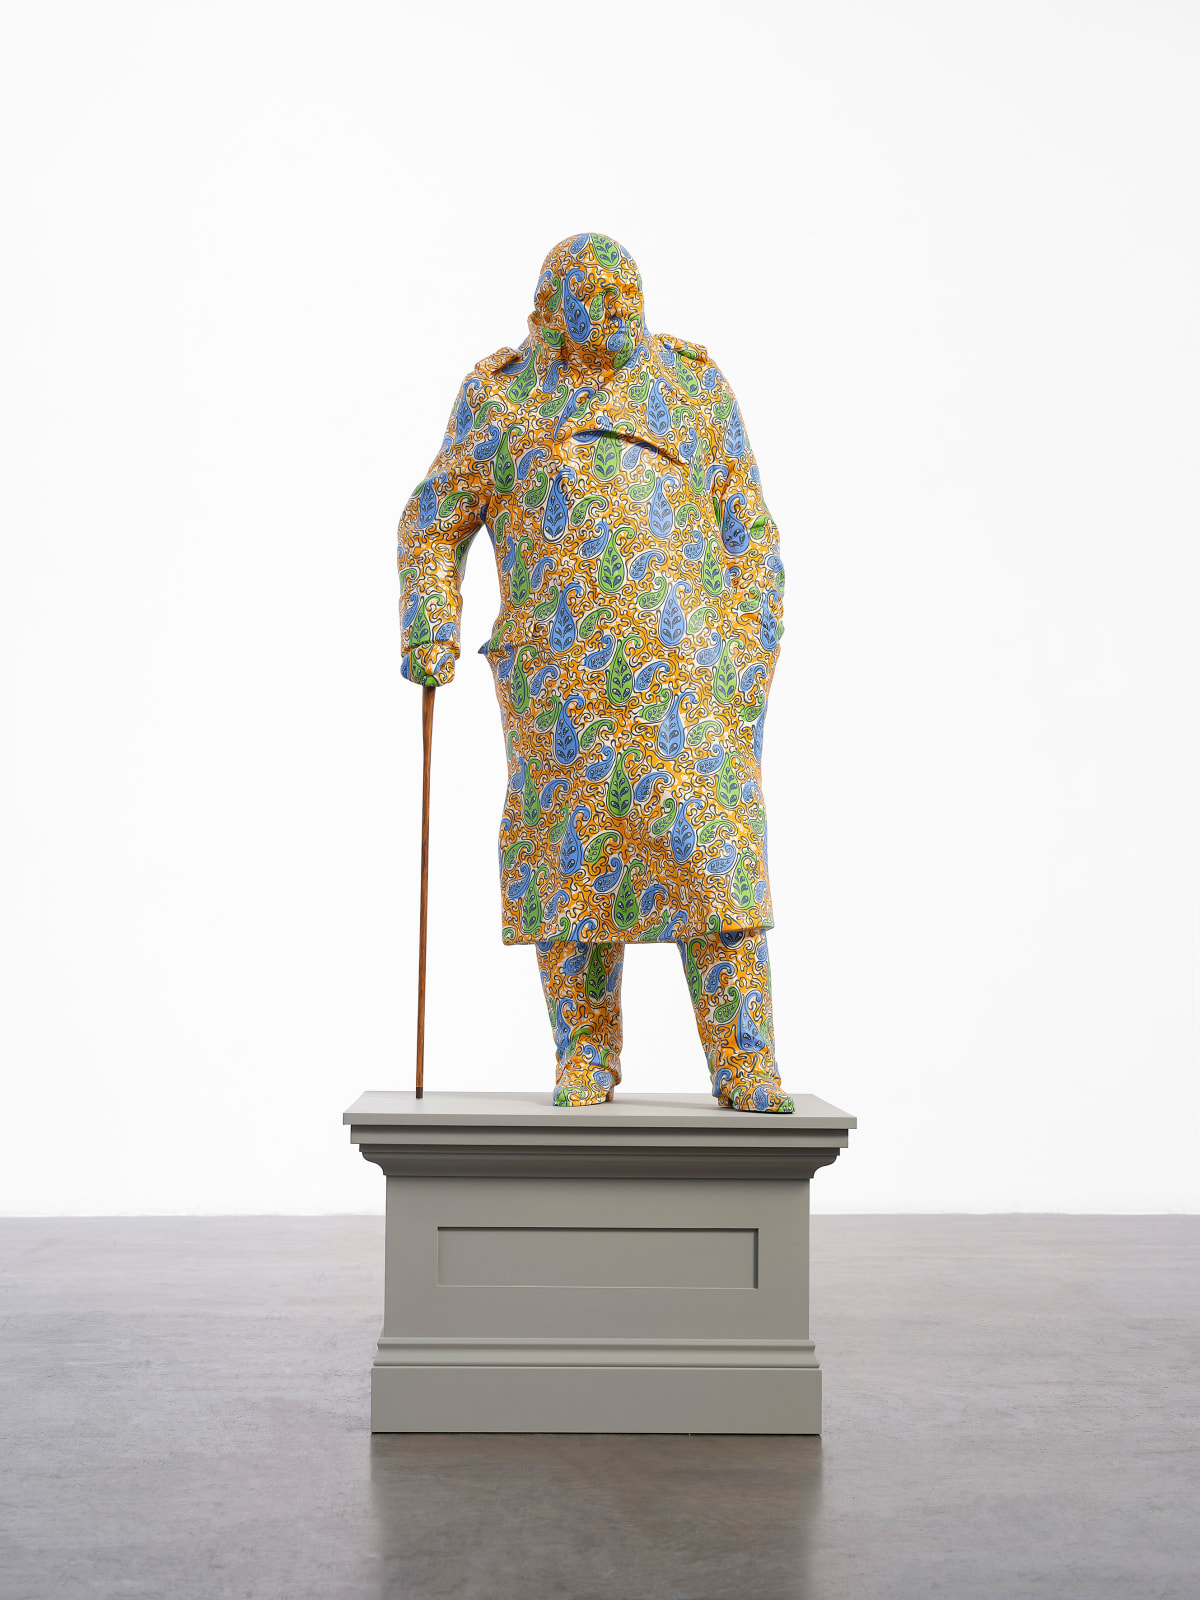 <div class="artist">Yinka Shonibare CBE RA</div><div class="title_and_year"><span class="title">Decolonised Structures (Churchill)</span><span class="year">, 2023</span></div>